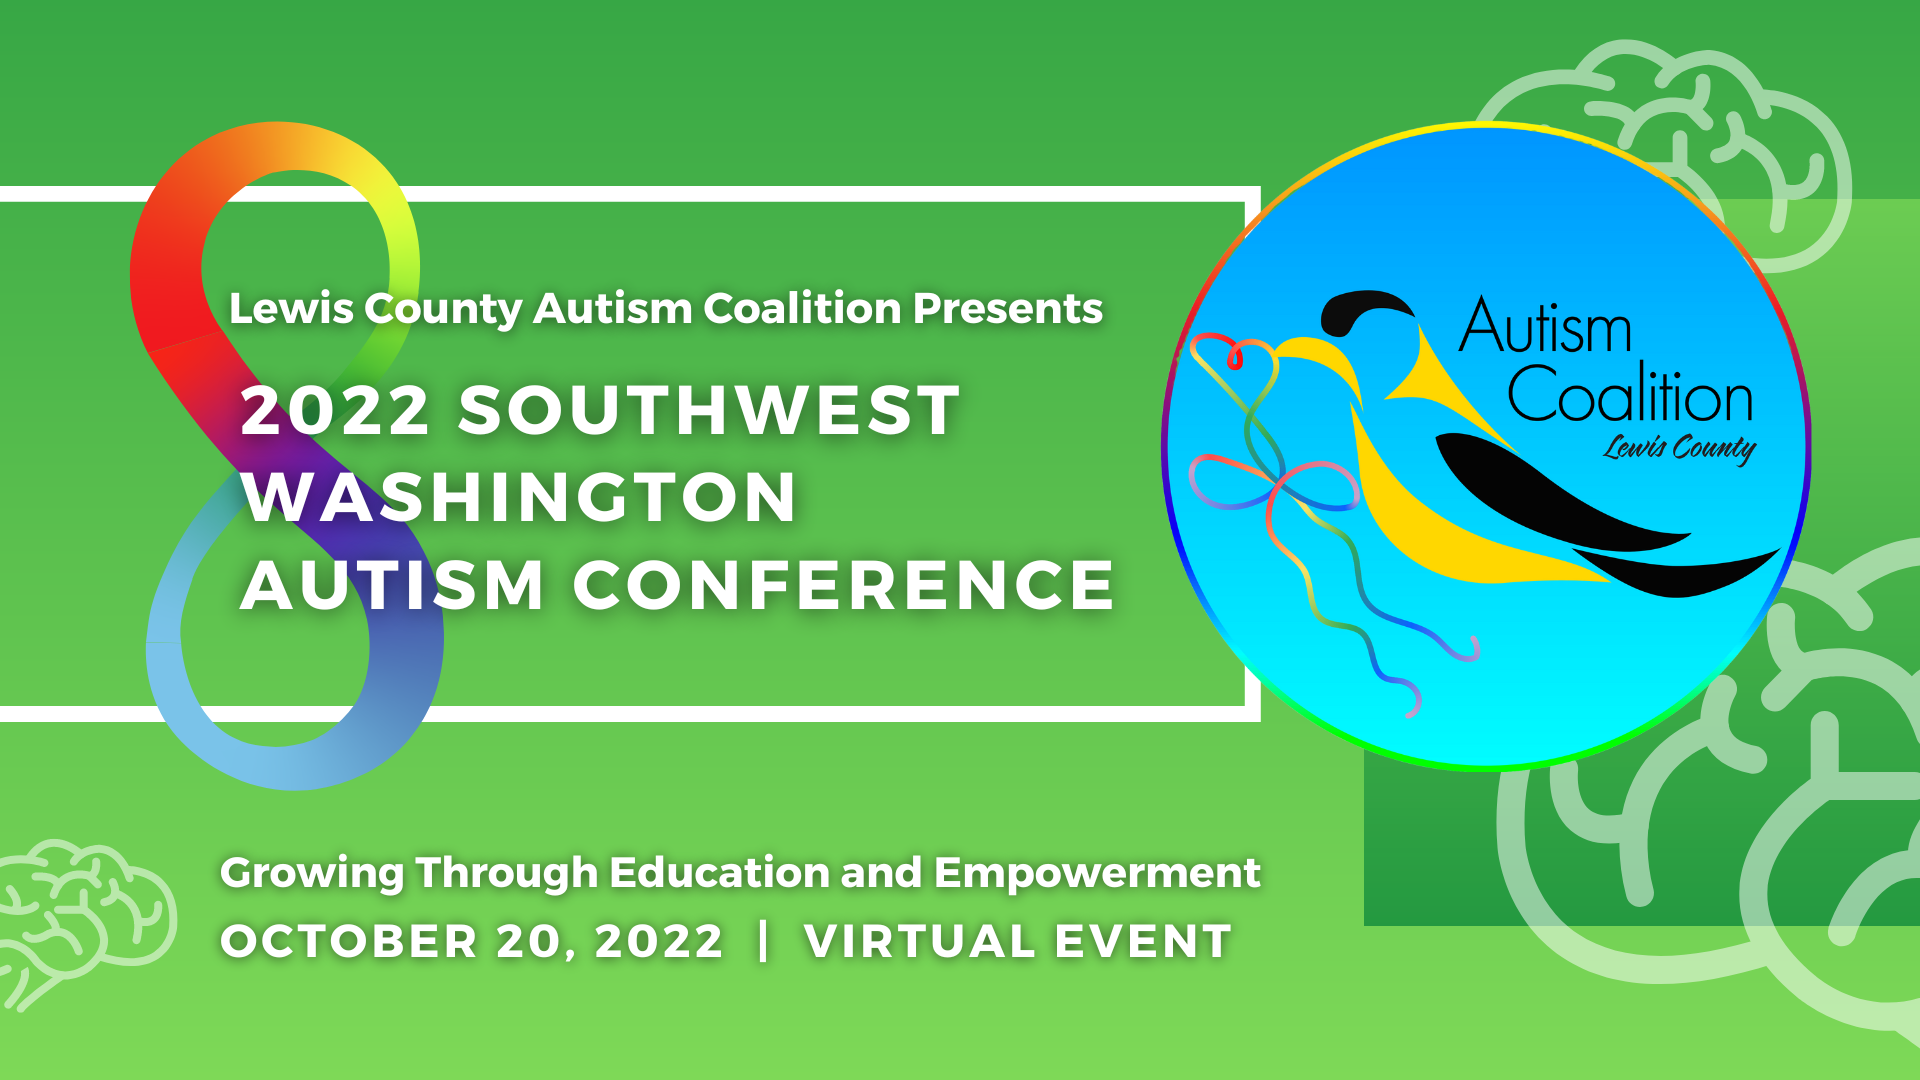 2022 SWWA Autism Conference Lewis County Autism Coalition